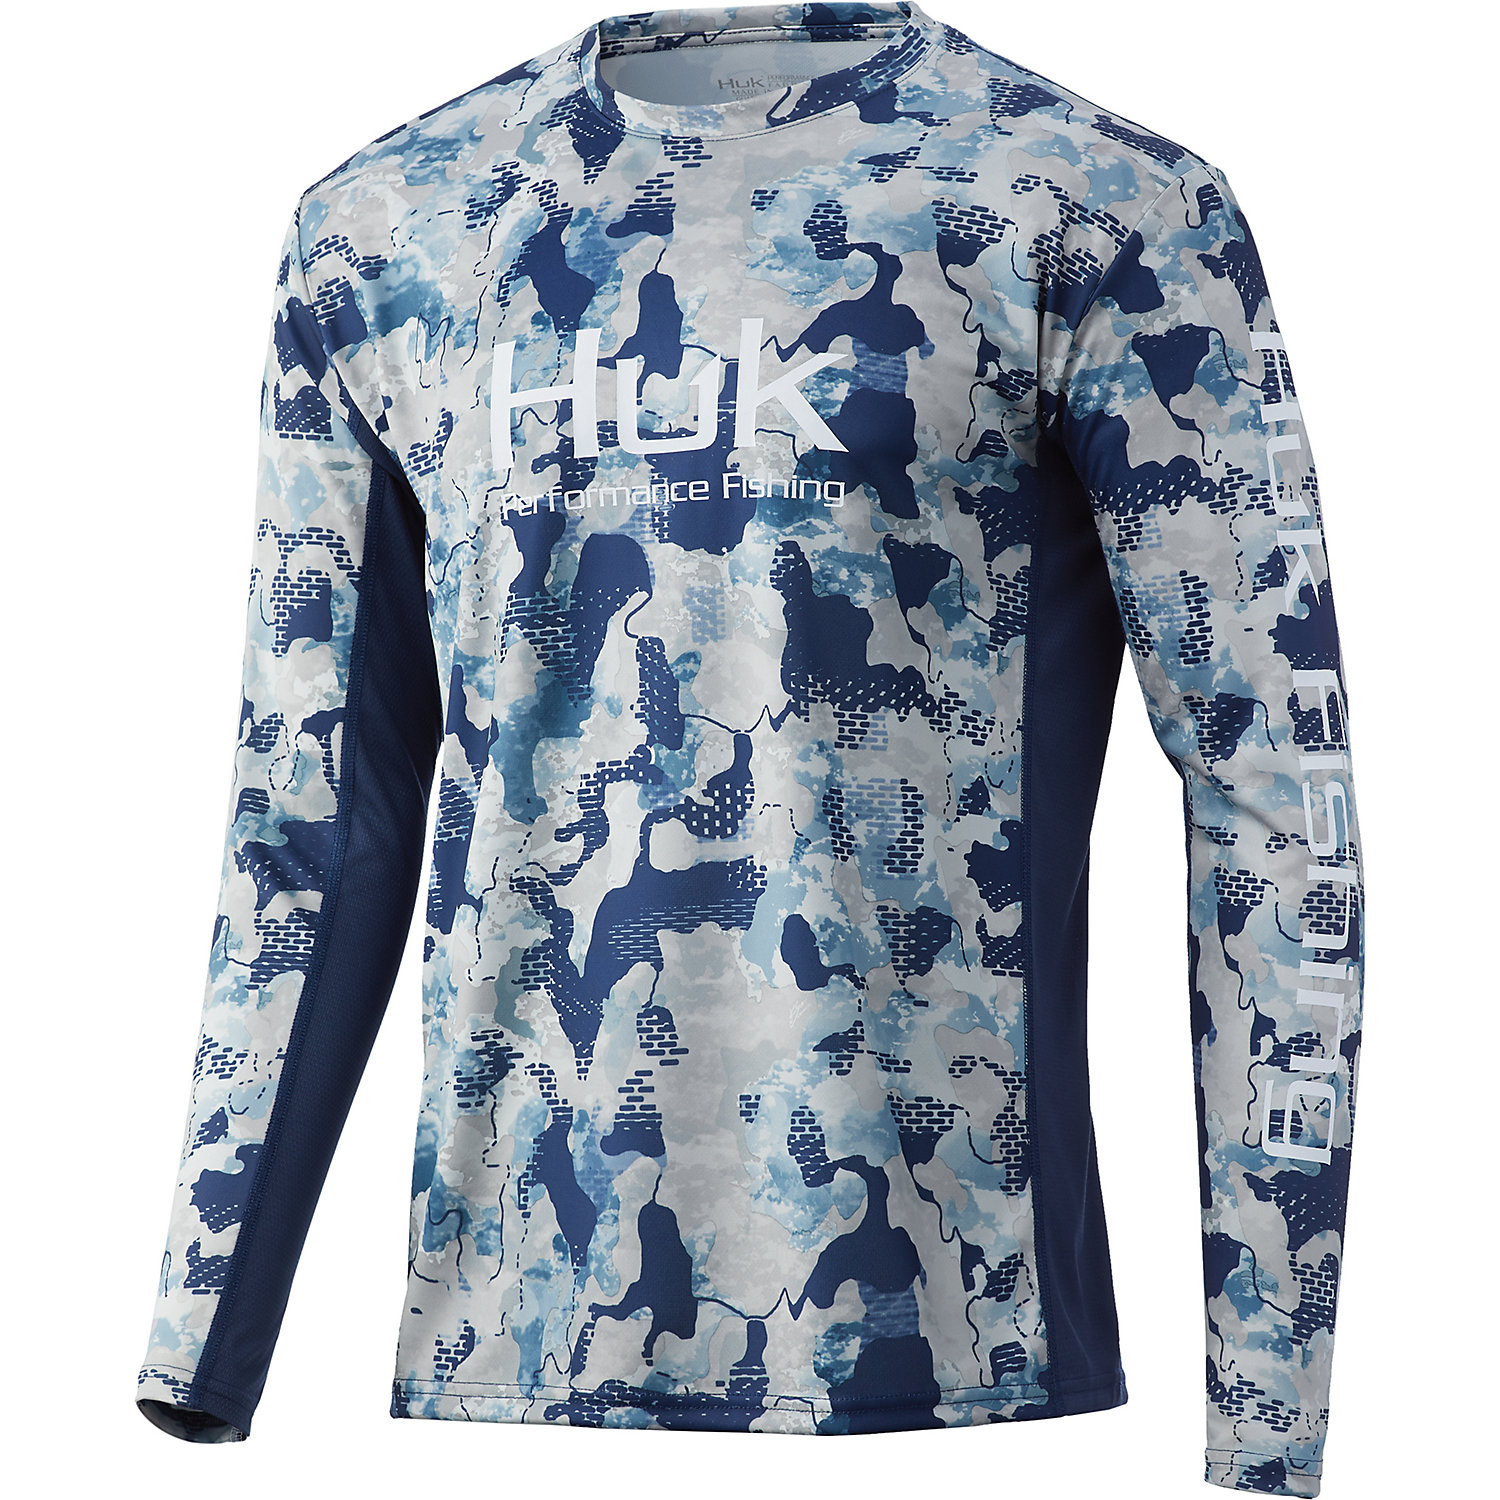 Huk Mens Icon X KC Refraction Camo LS Top